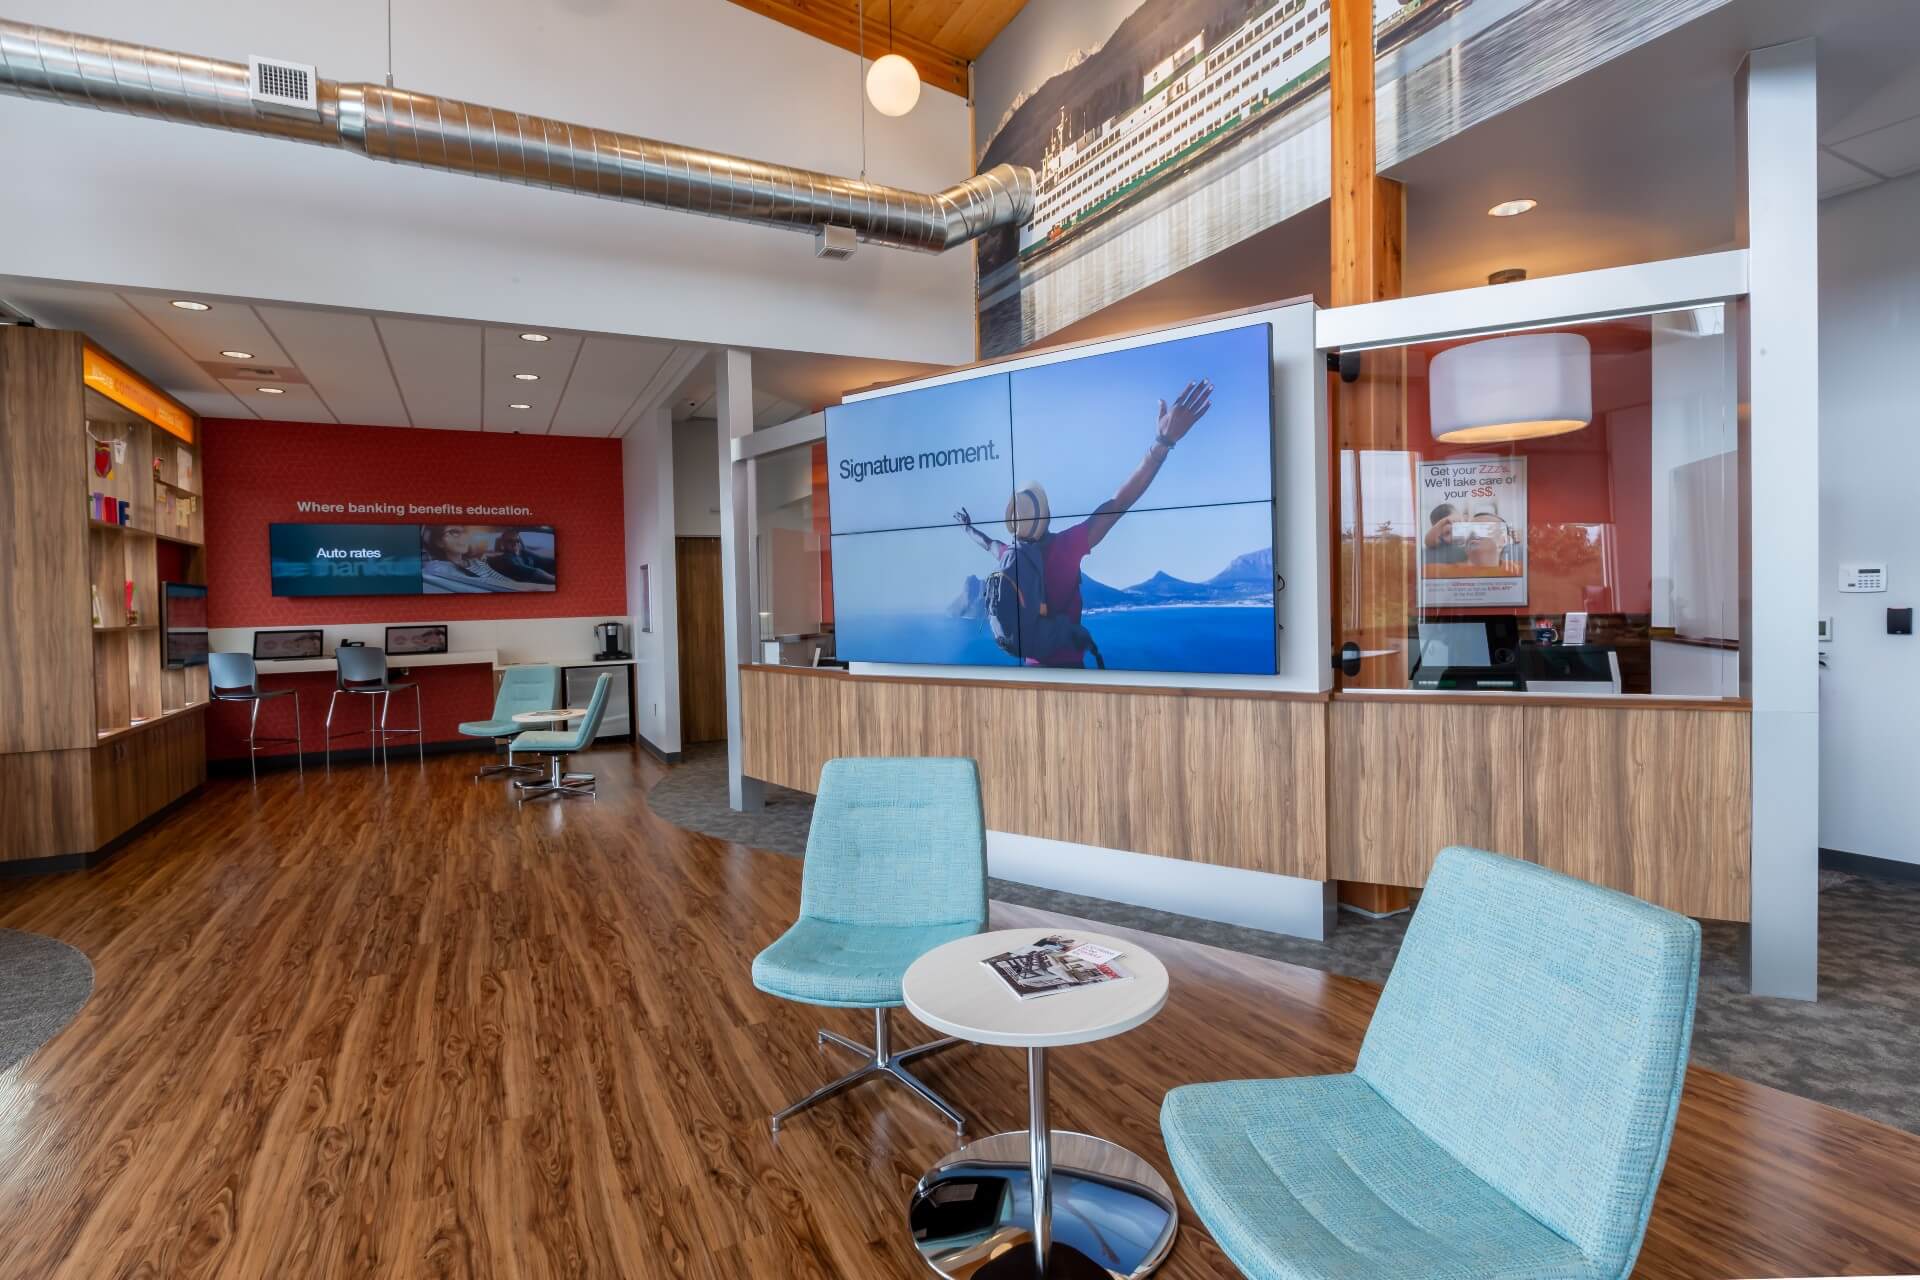 Image of Inspirus Credit Union in Bremerton's well-designed waiting area, which includes seating options, a reception desk, and eye-catching digital signage.